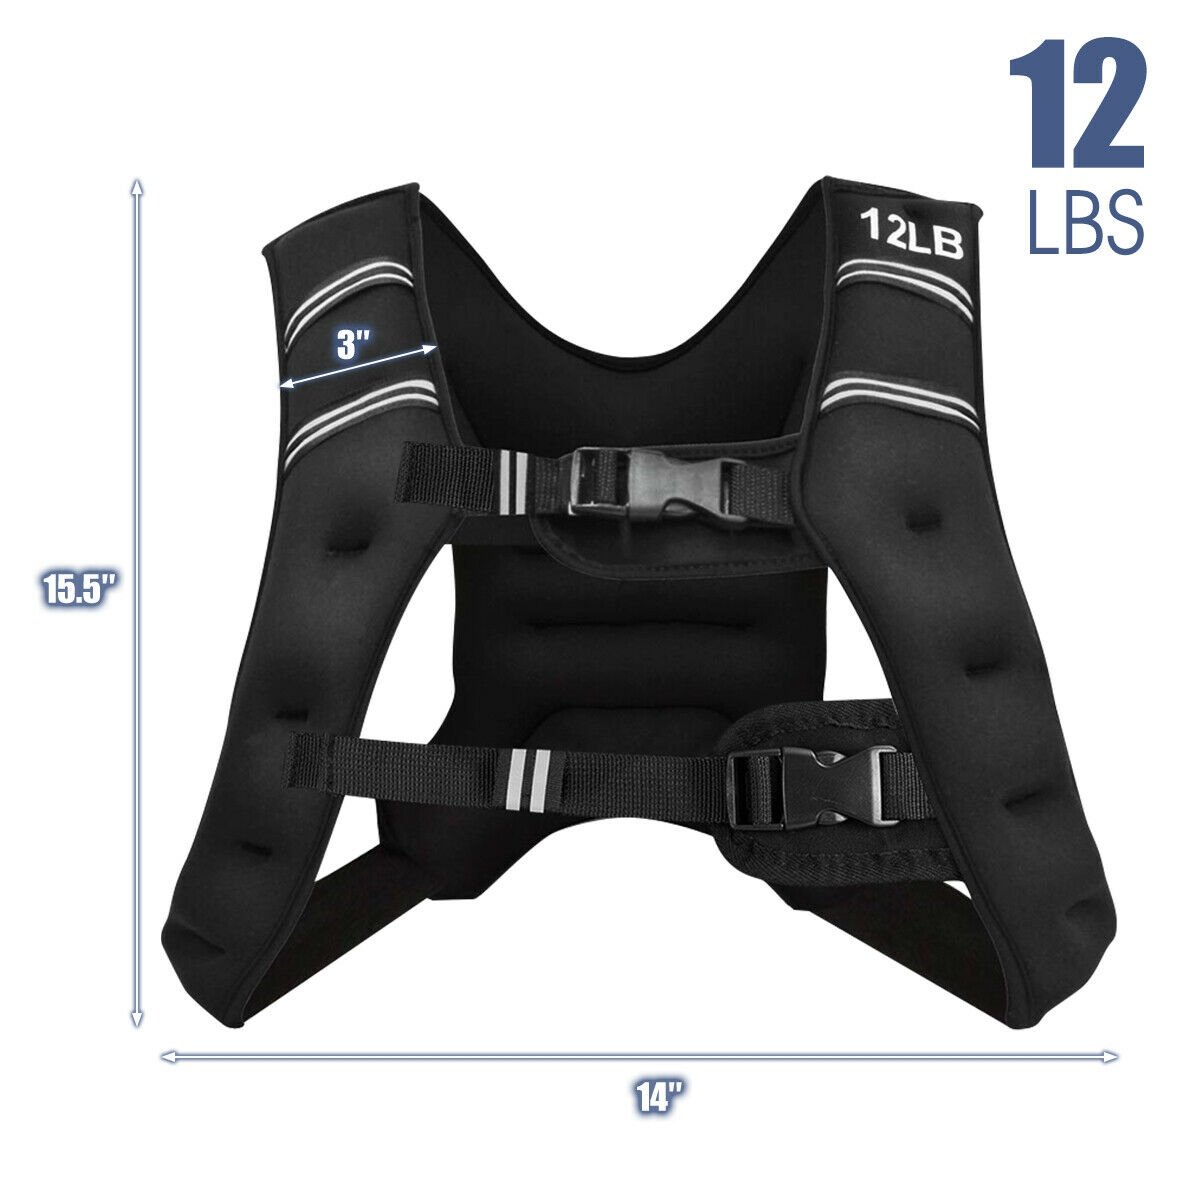 Training Weight Vest Workout Equipment with Adjustable Buckles and Mesh Bag-12 lbs, Black at Gallery Canada